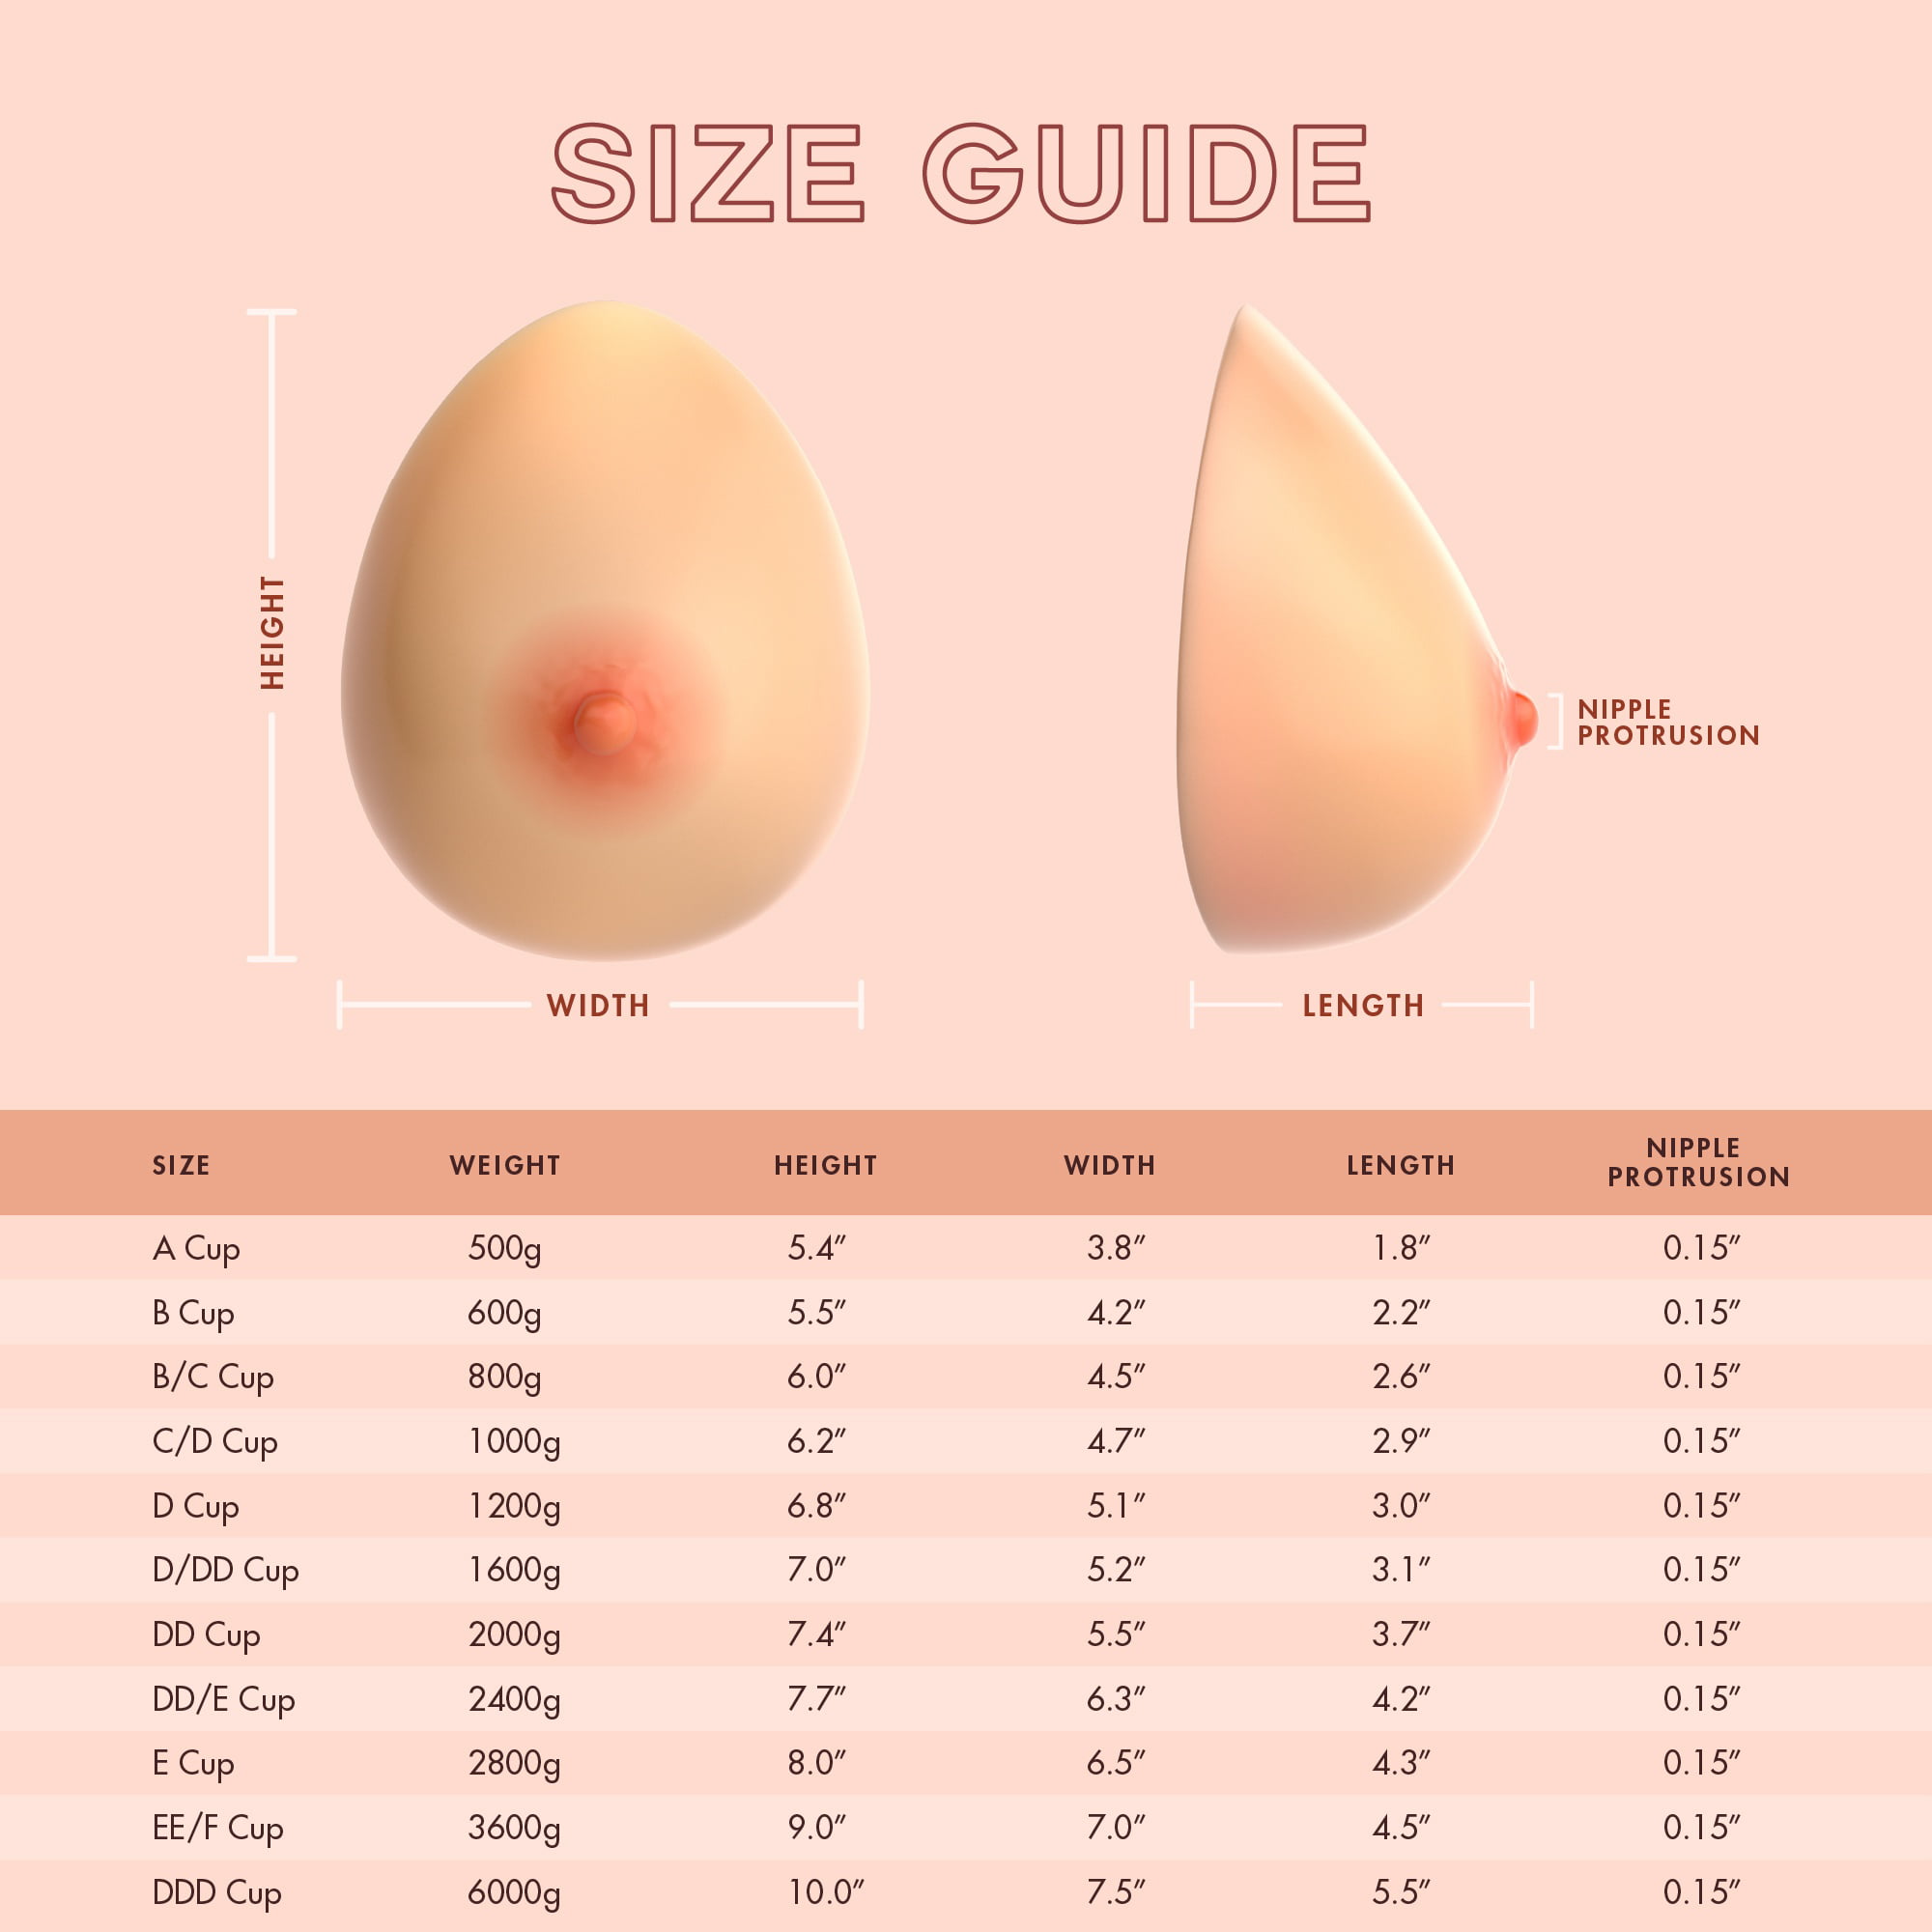 Feminique Silicone Breast Forms for Mastectomy, DD Cup (1000g